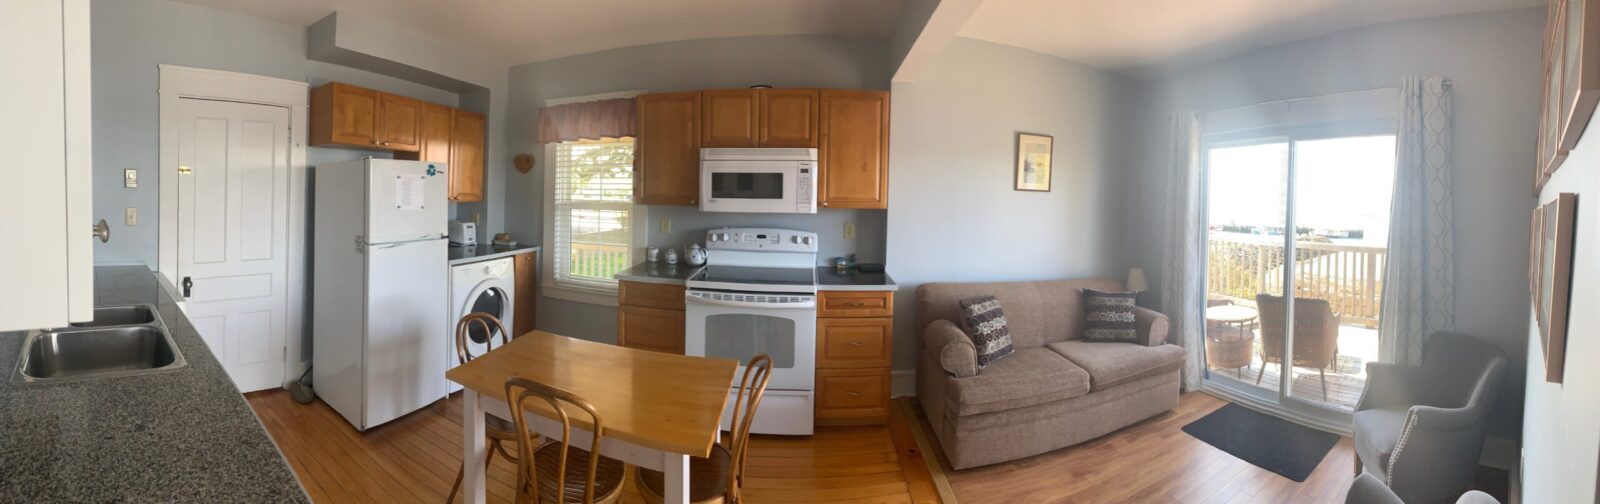 A view of a kitchen and living room.